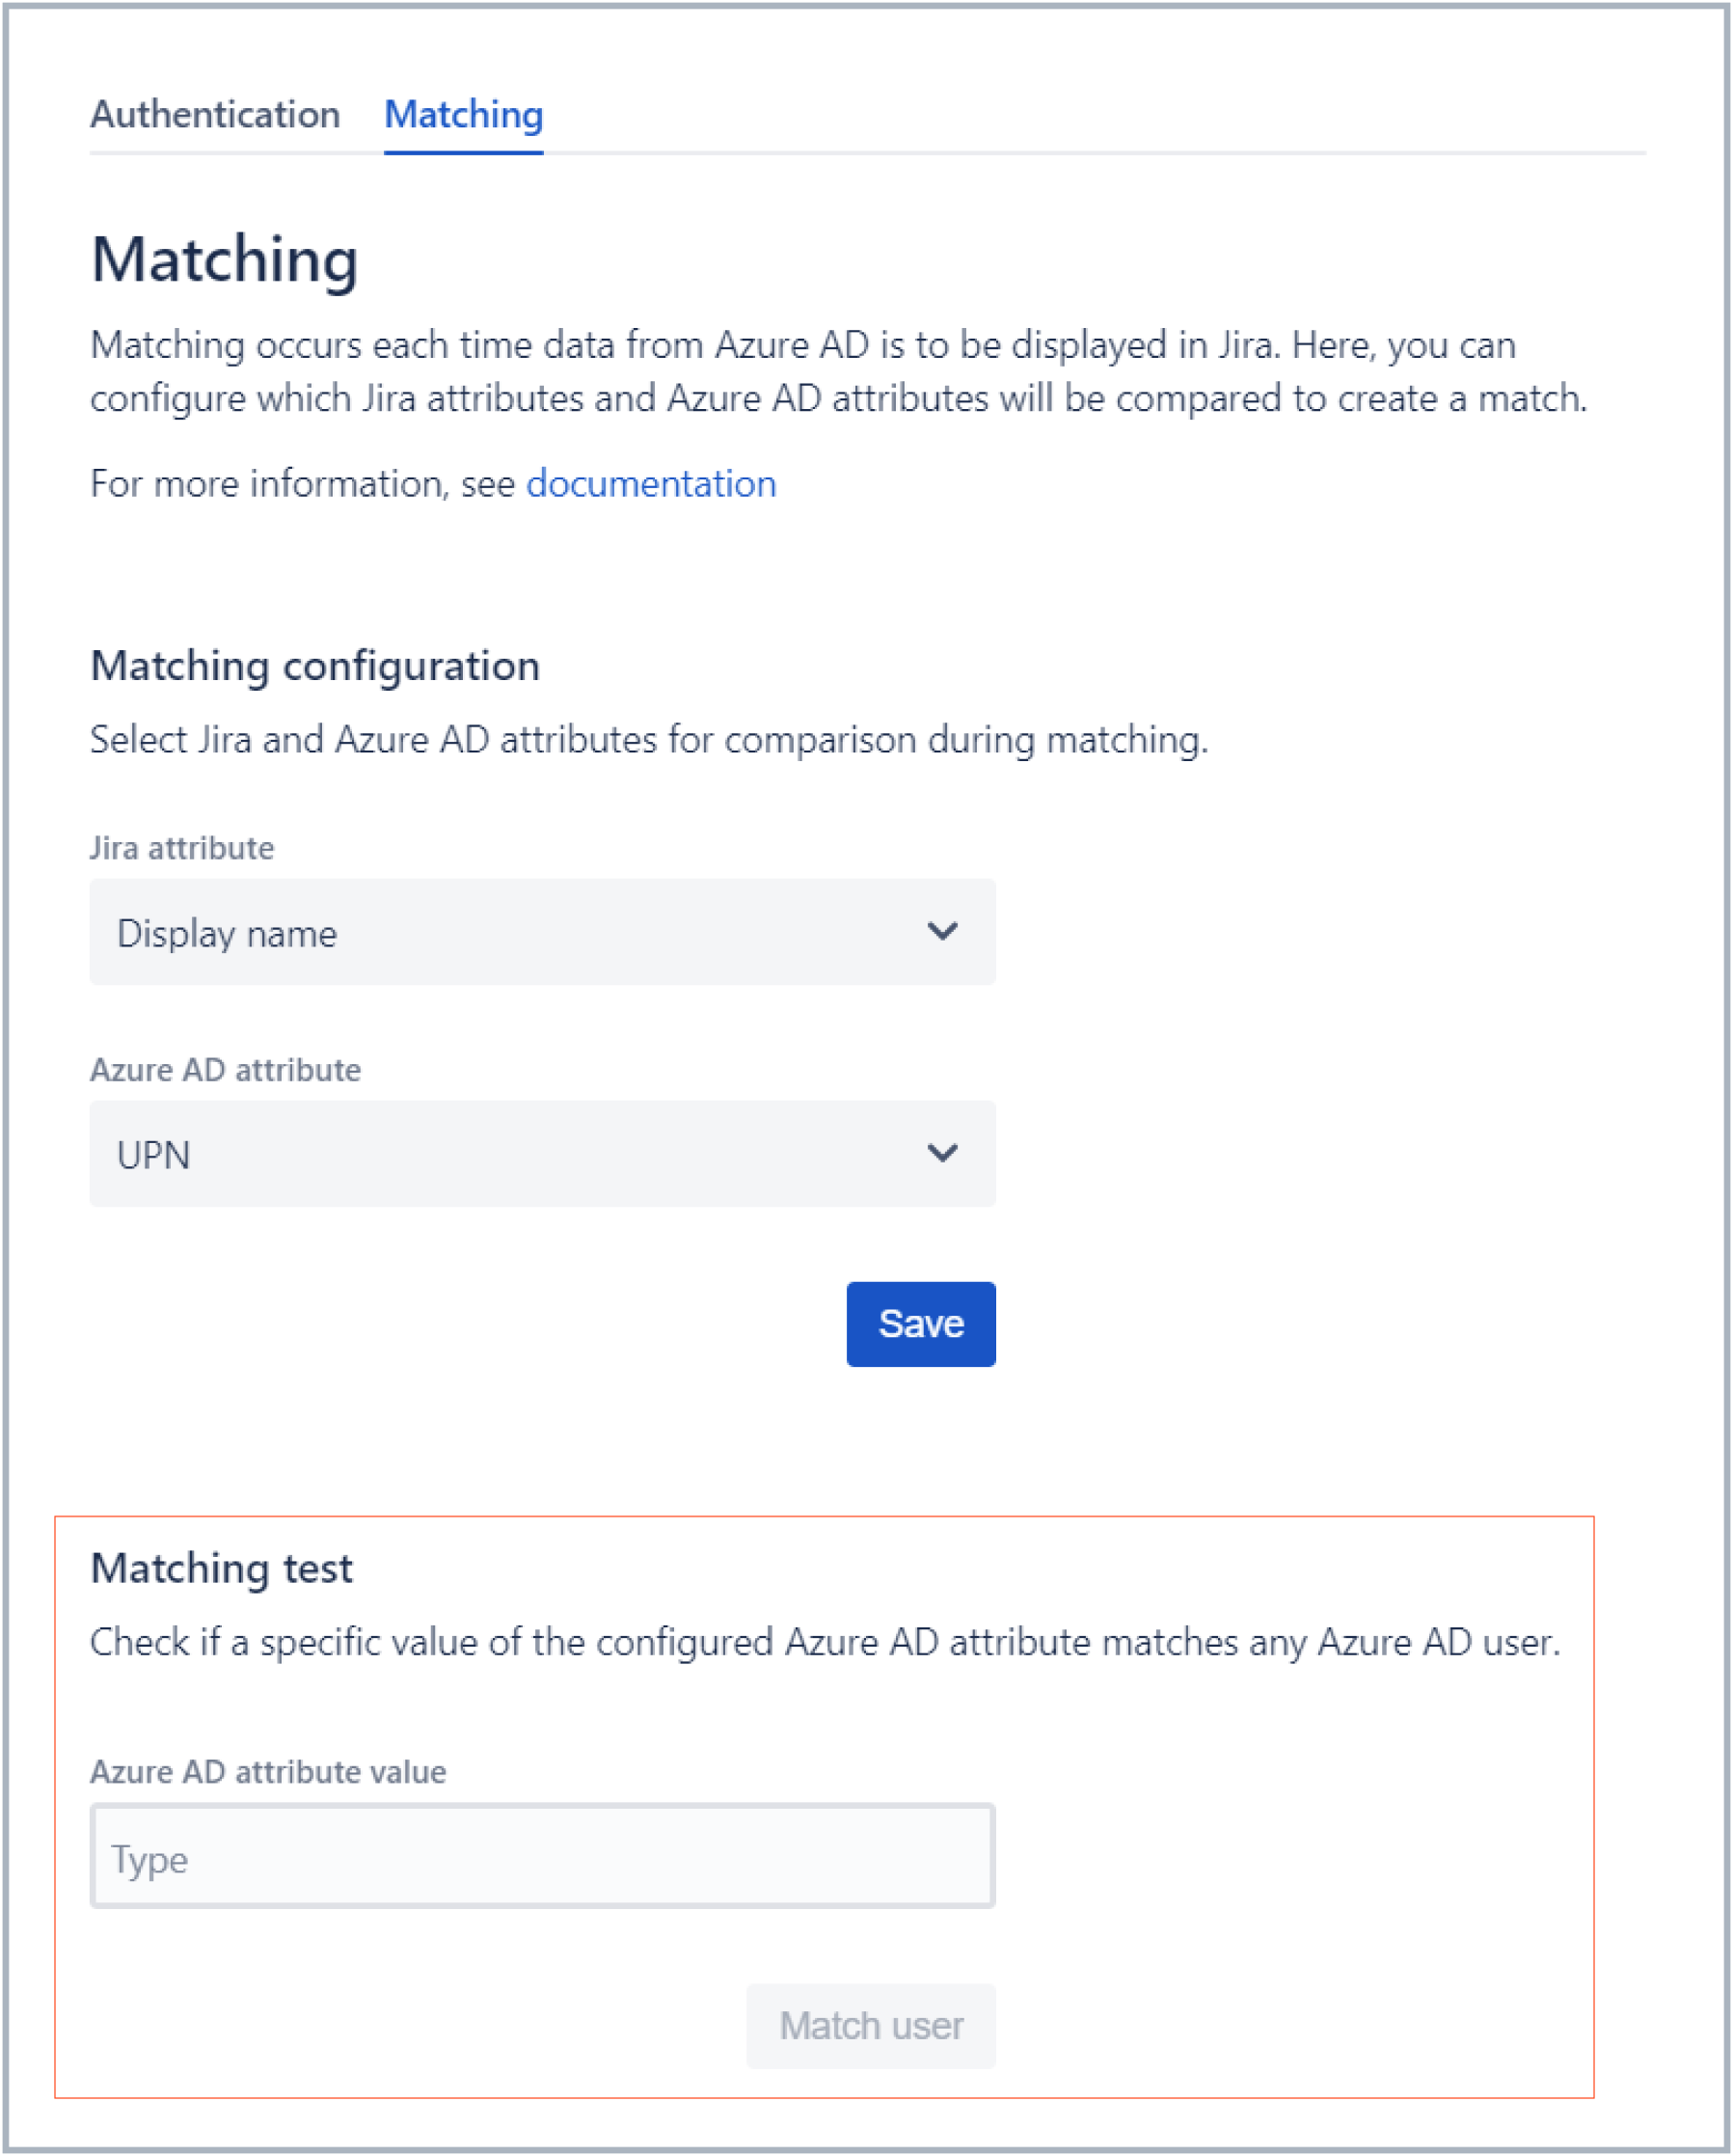 Jira Active Directory integration with Azure AD Attributes - Matching Test